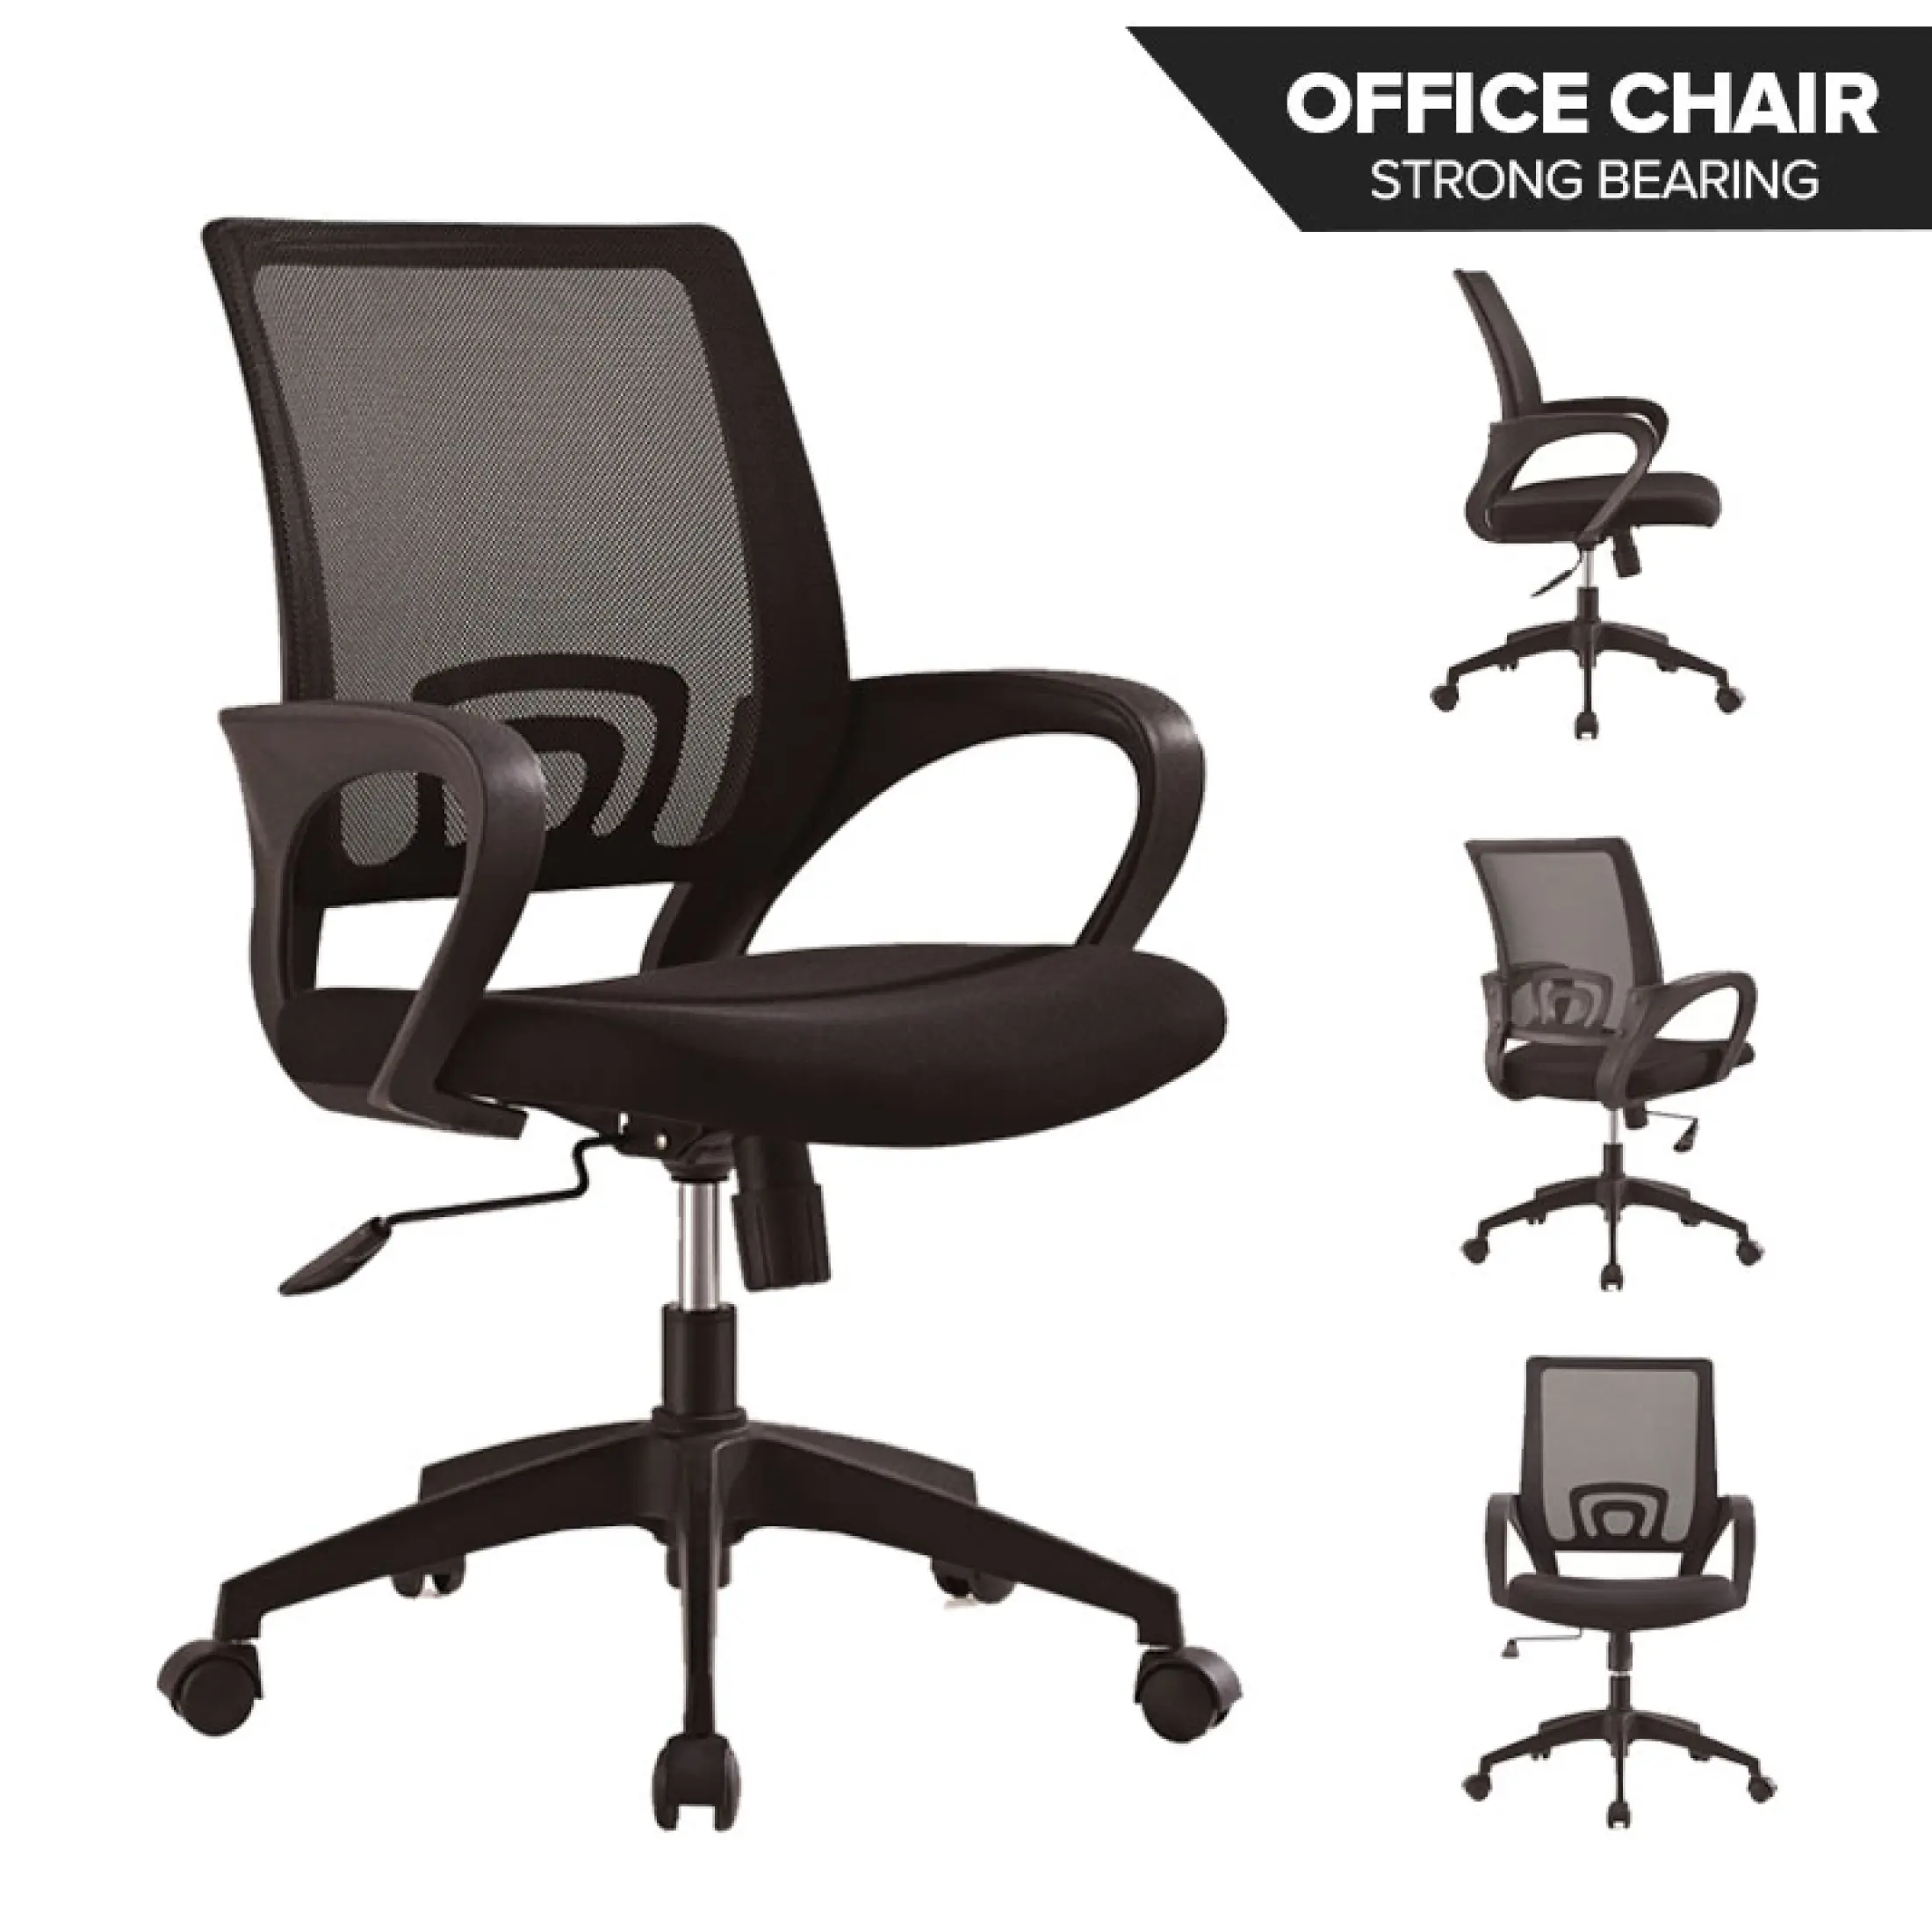 Greenmoon Office Chair Adjustable Height 360 Rotat Mesh Comfortable And Breathable Home Office Furniture Back Lazada Ph